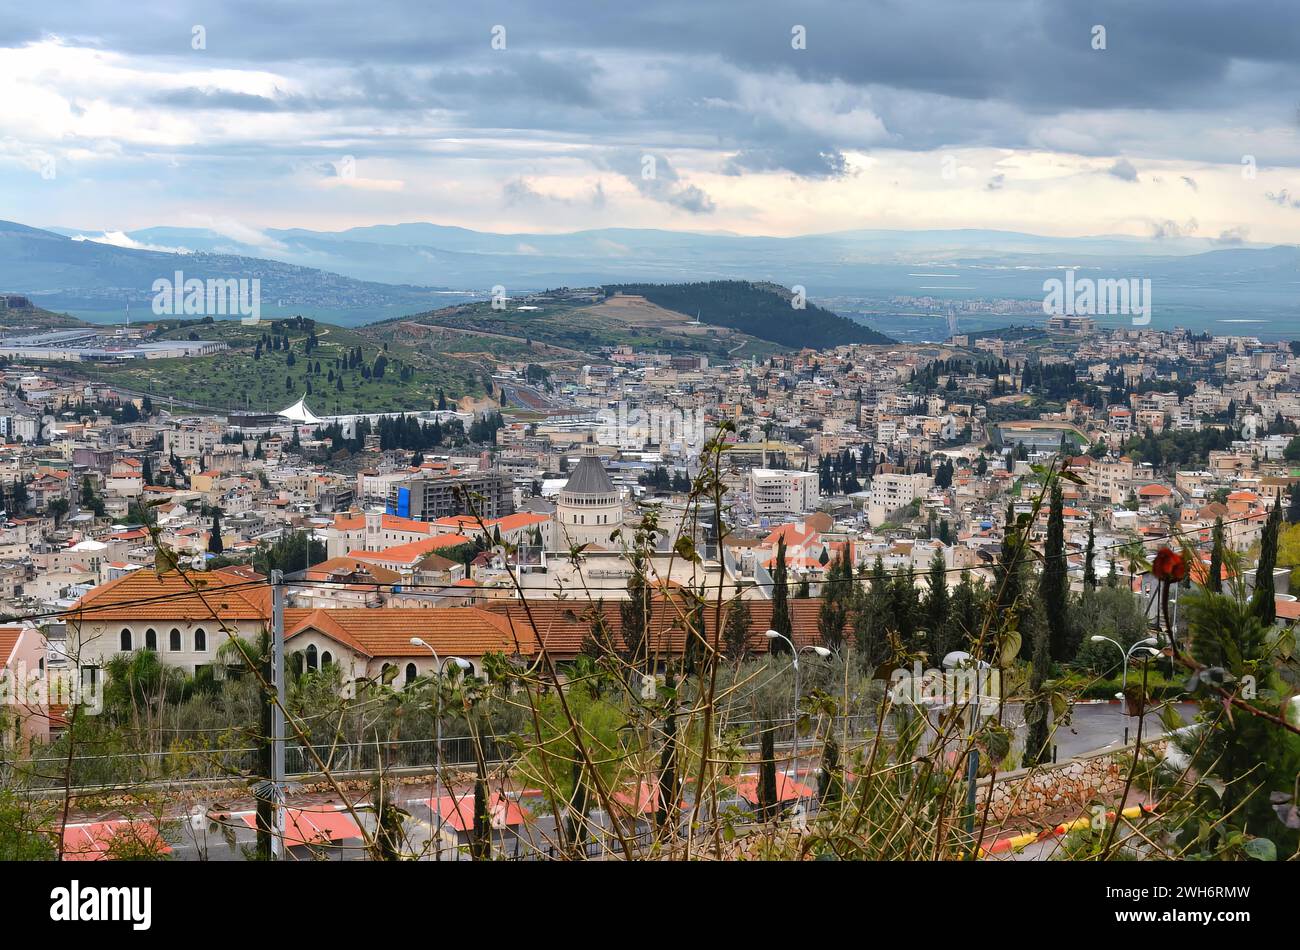 An areal View of Nazareth city center and Mount Kedumim ( Mount Precipice) in the background Stock Photo